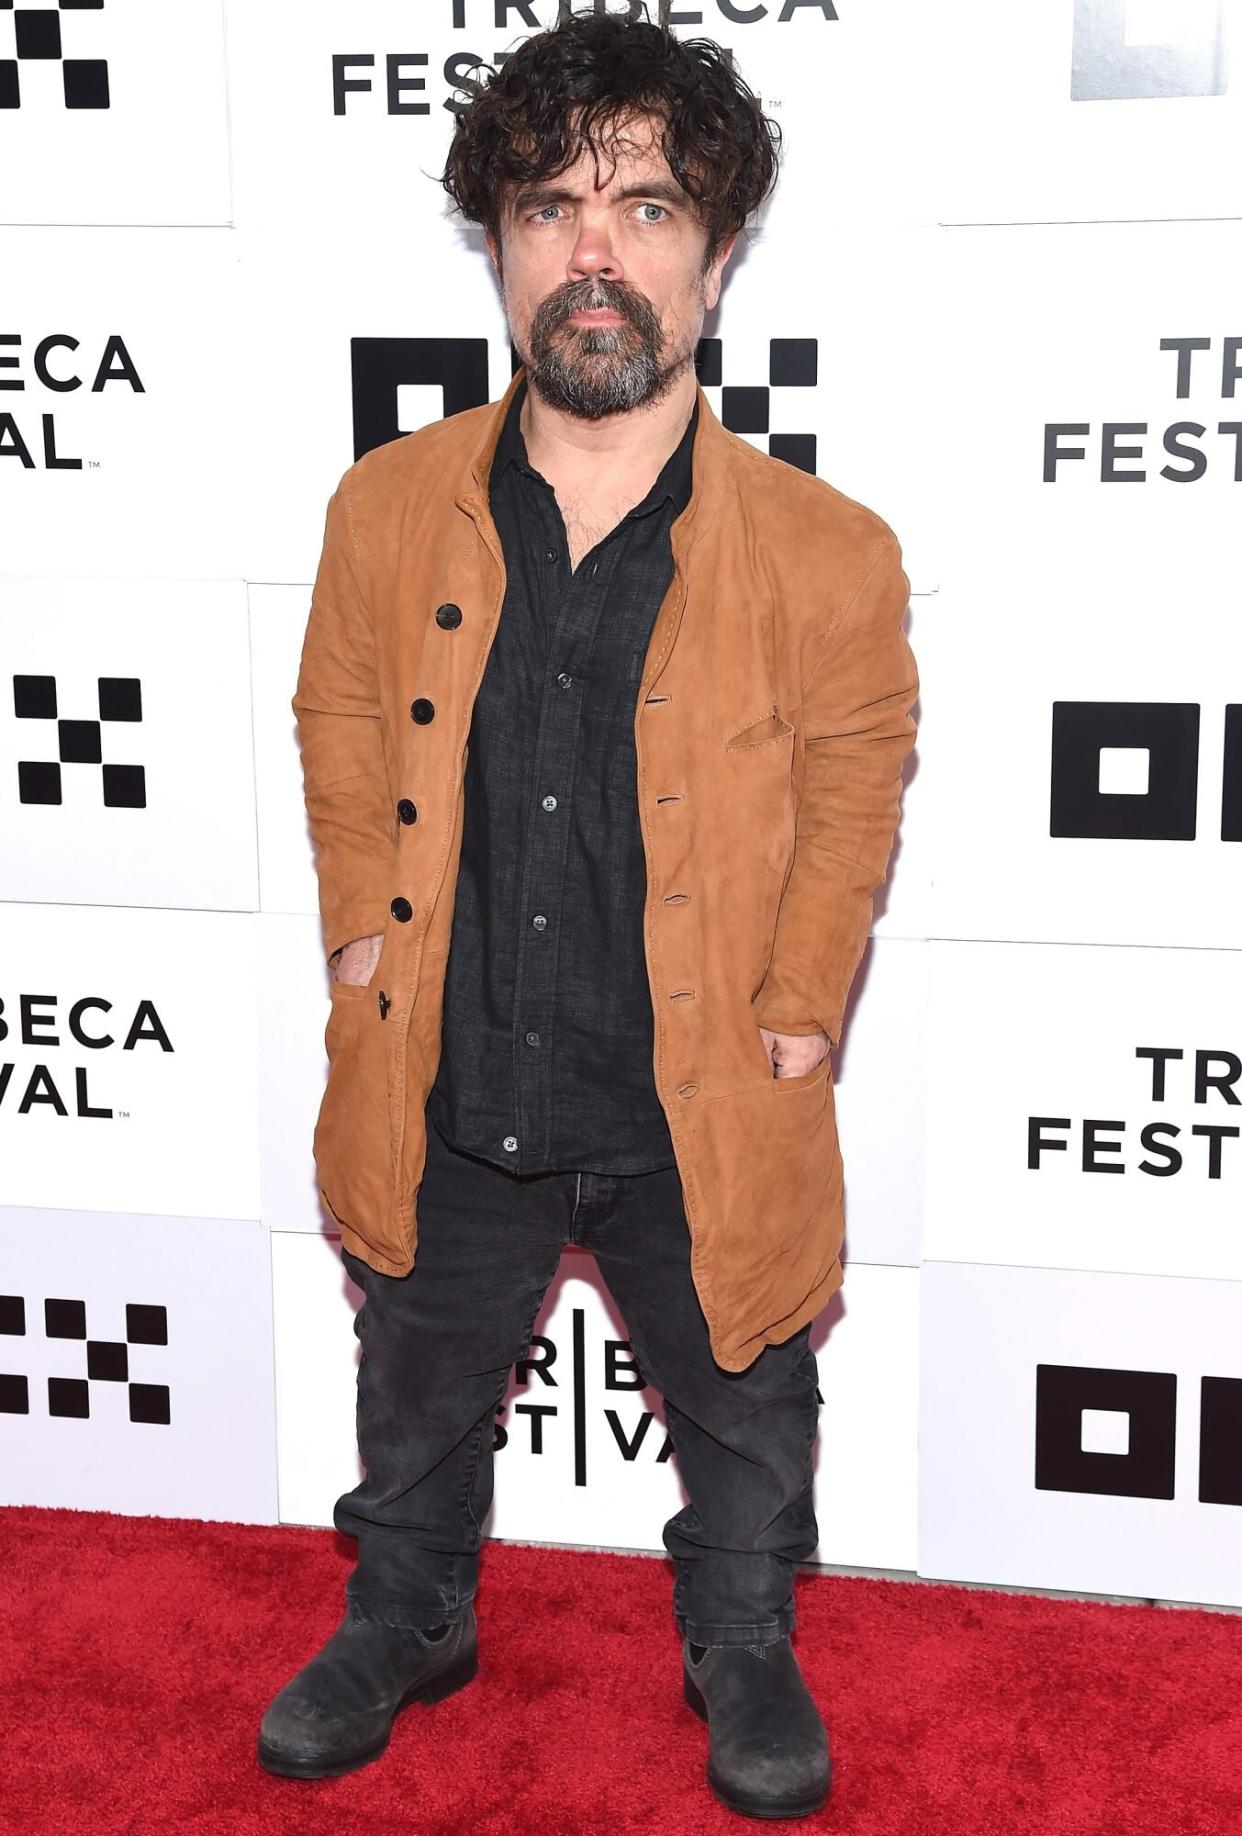 NEW YORK, NEW YORK - JUNE 11: Actor Peter Dinklage attends the screening of "American Dreamer" during the 2022 Tribeca Festival at BMCC Tribeca PAC on June 11, 2022 in New York City. (Photo by Gary Gershoff/WireImage)